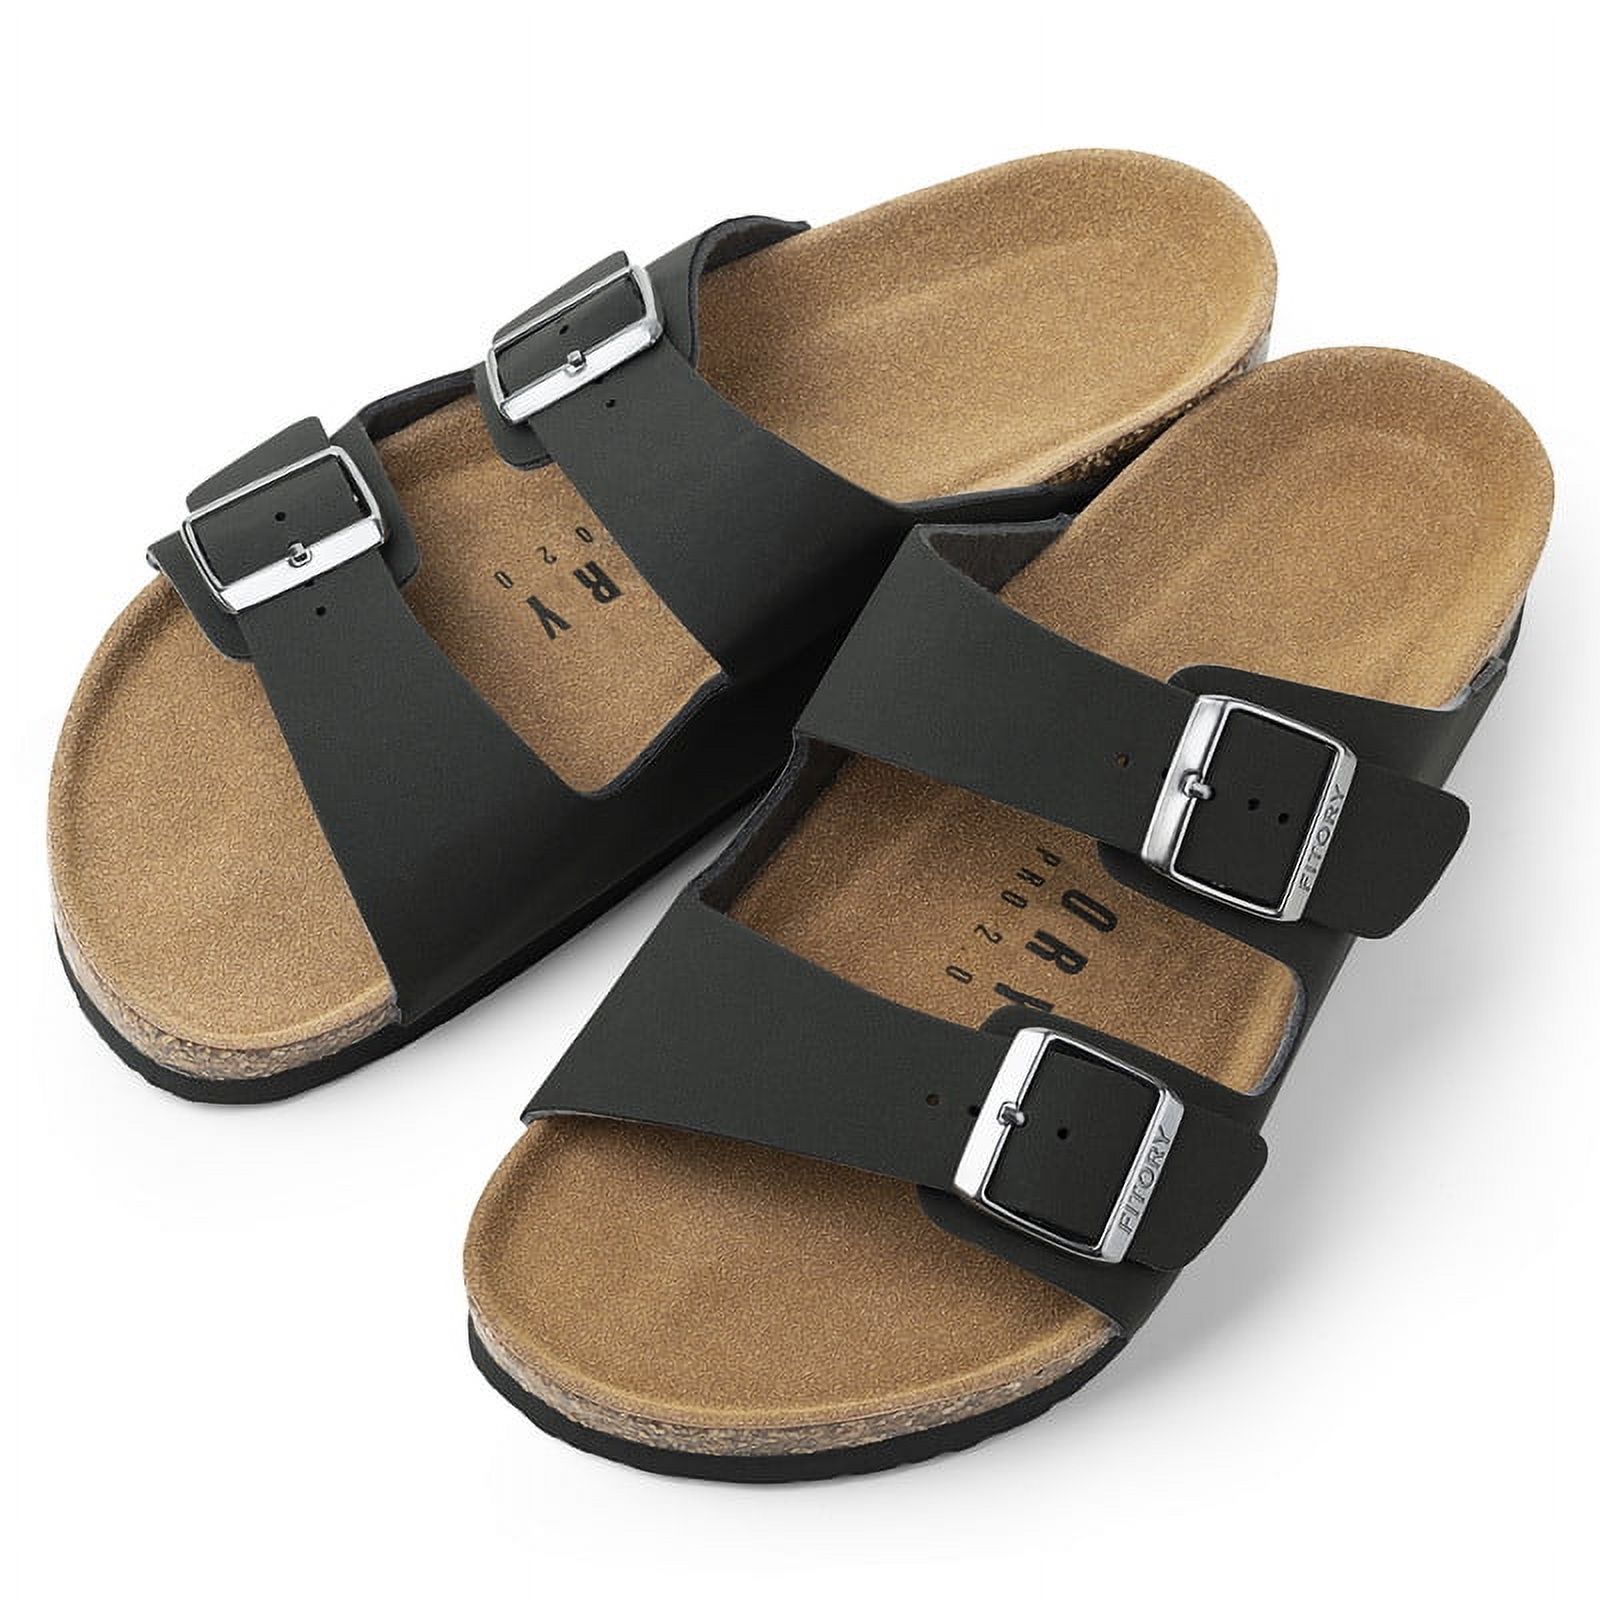 Mens Sandals, Arch Support Slides with Adjustable Buckle Straps and ...